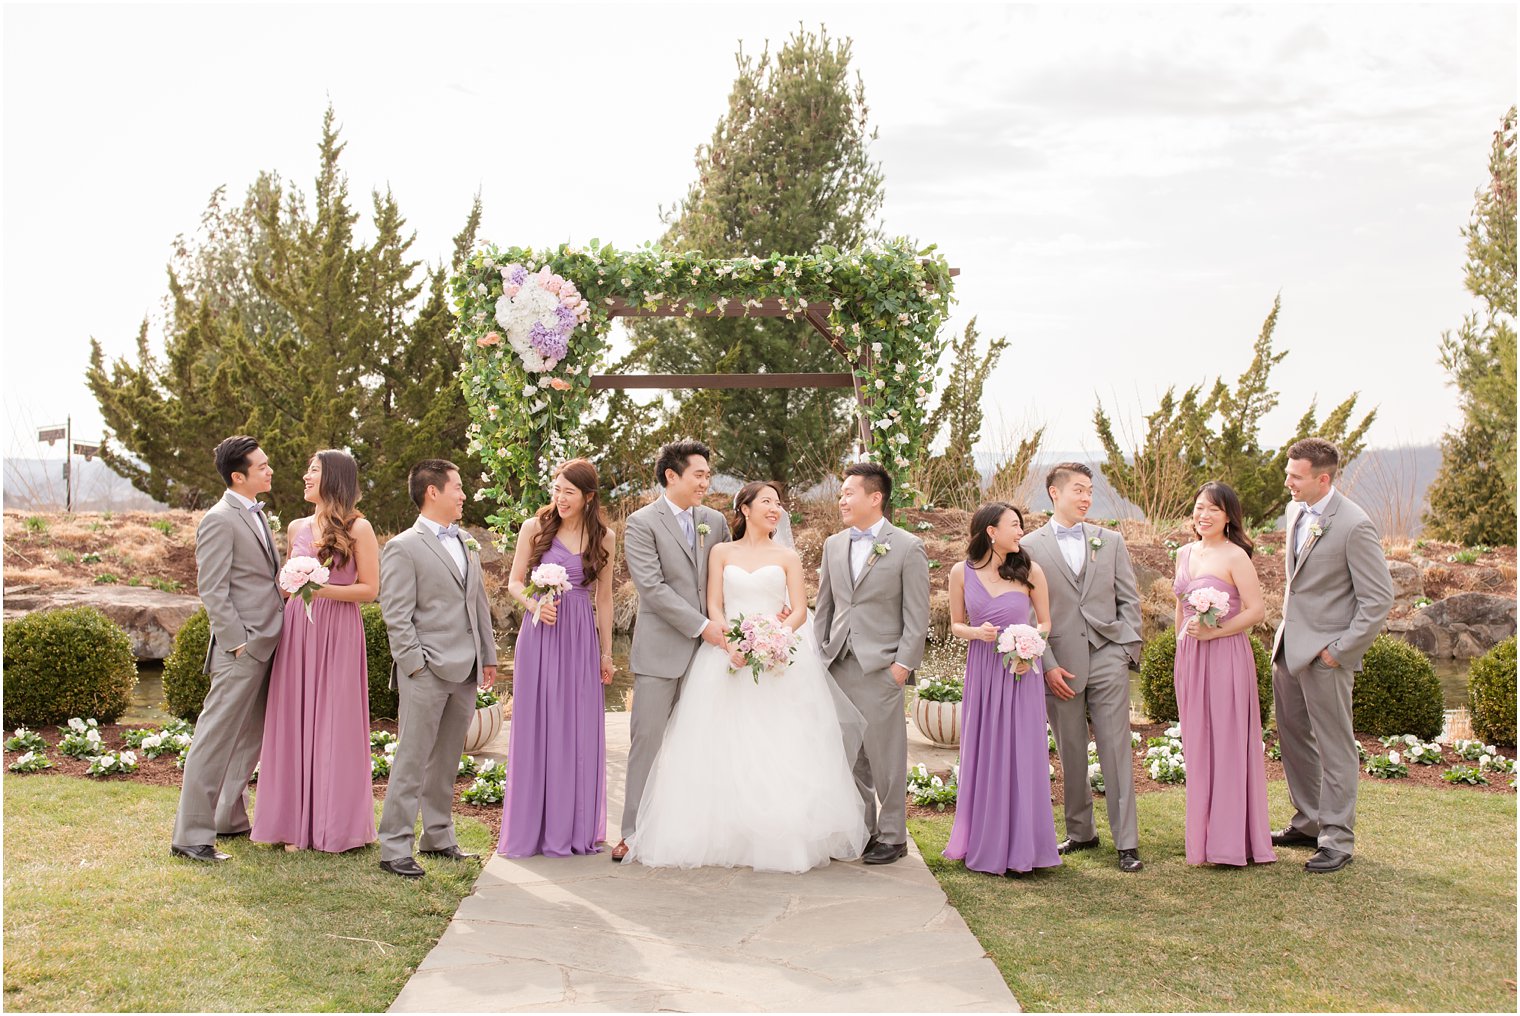 Bridal party wearing shades of purple and gray